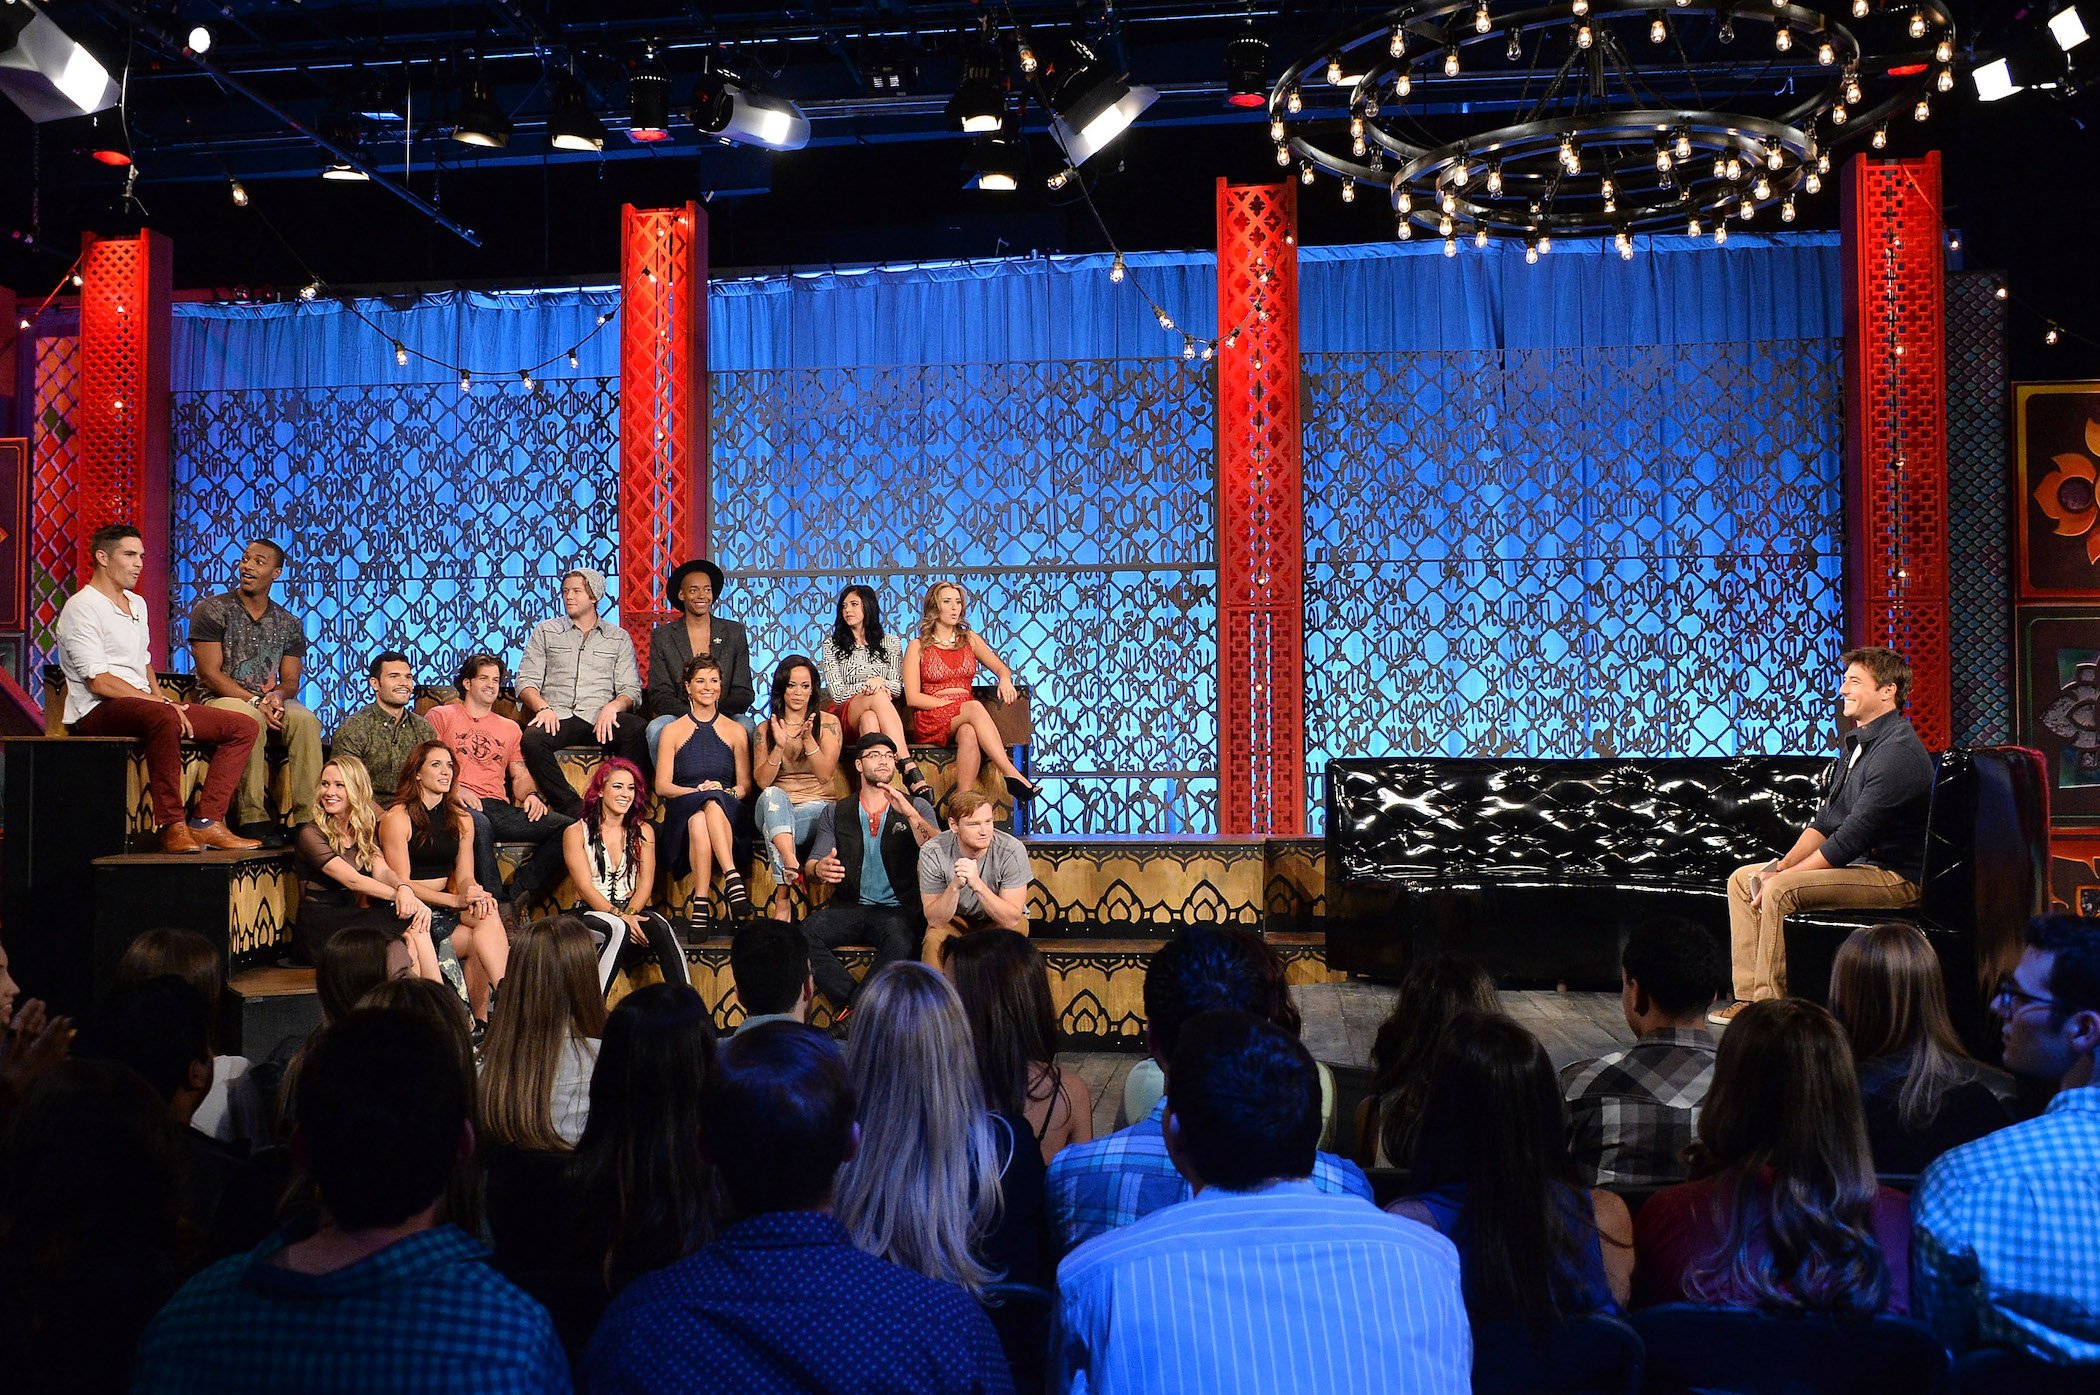 A far-away shot of MTV's 'The Challenge' cast at the reunion show. Some of the cast will join 'The Challenge' Season 38